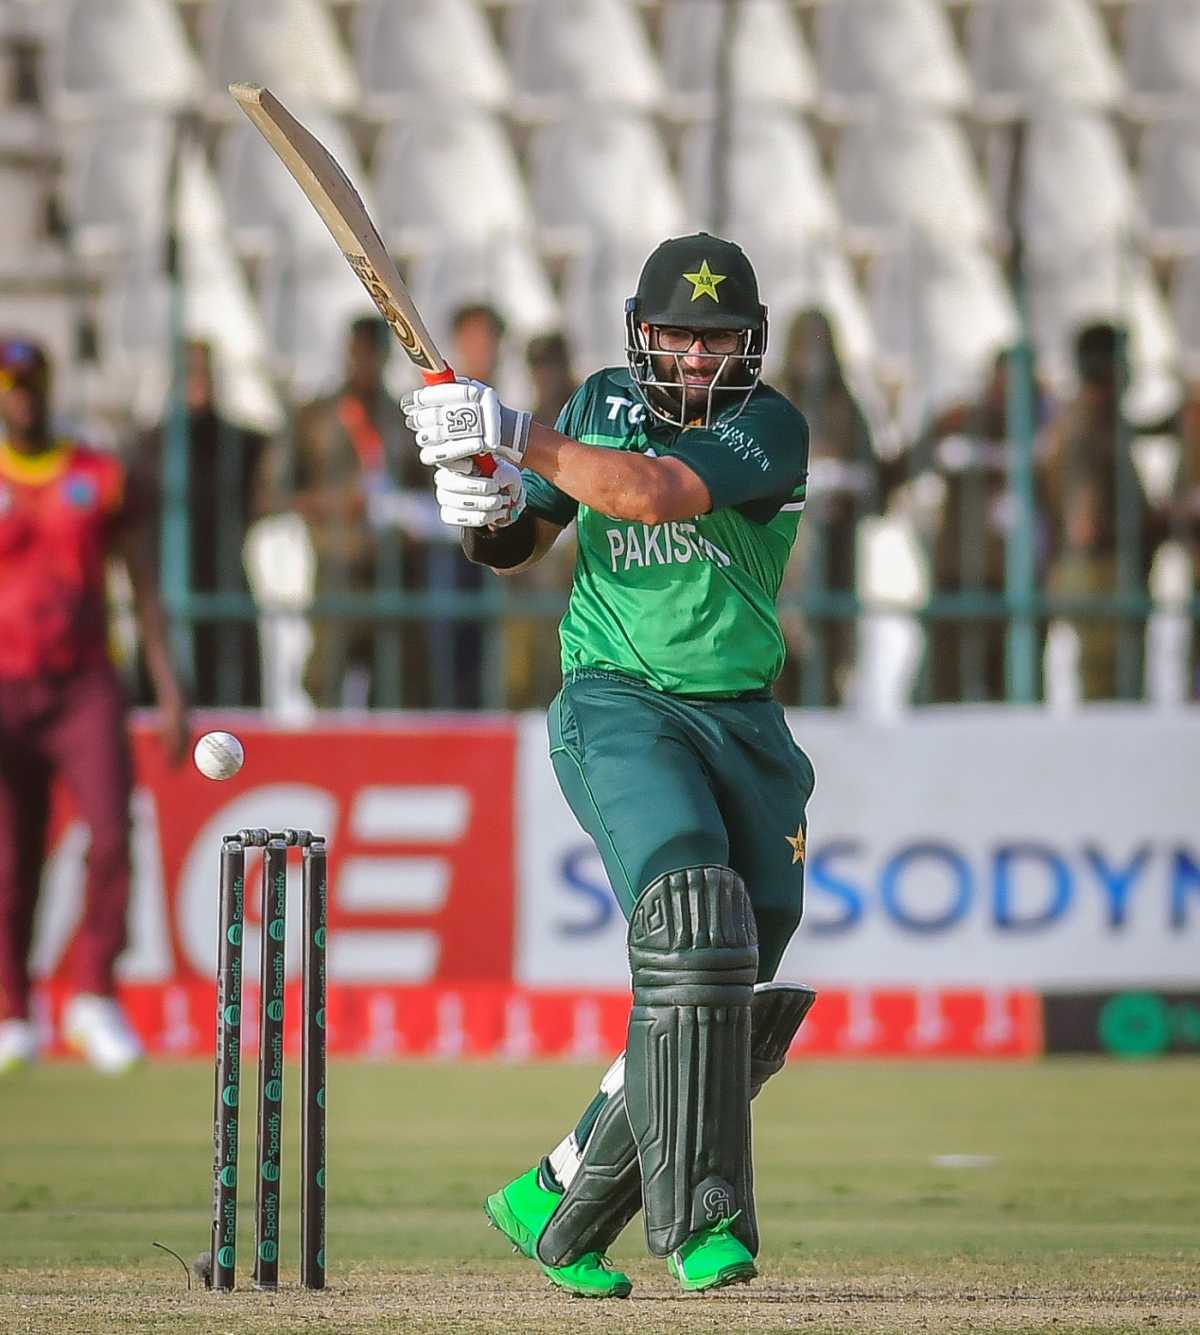 Imam Ul Haq ODI Photo And Editorial News Picture From ESPNcricinfo Image